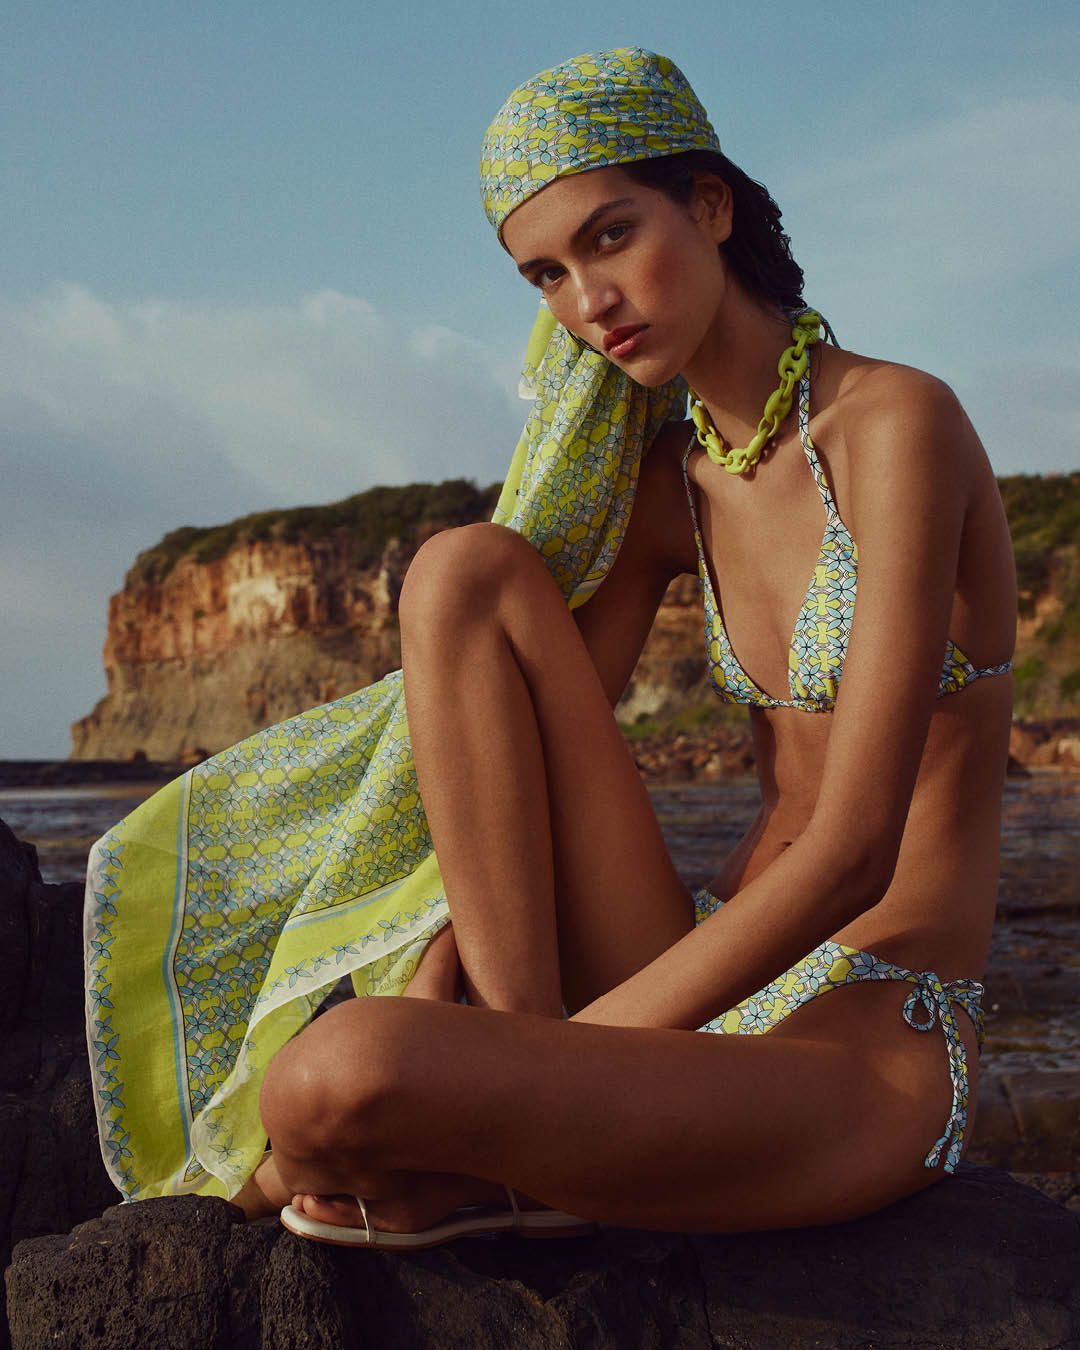 Model wearing a green and blue bikini and scarf sitting on rocks with the ocean in the background